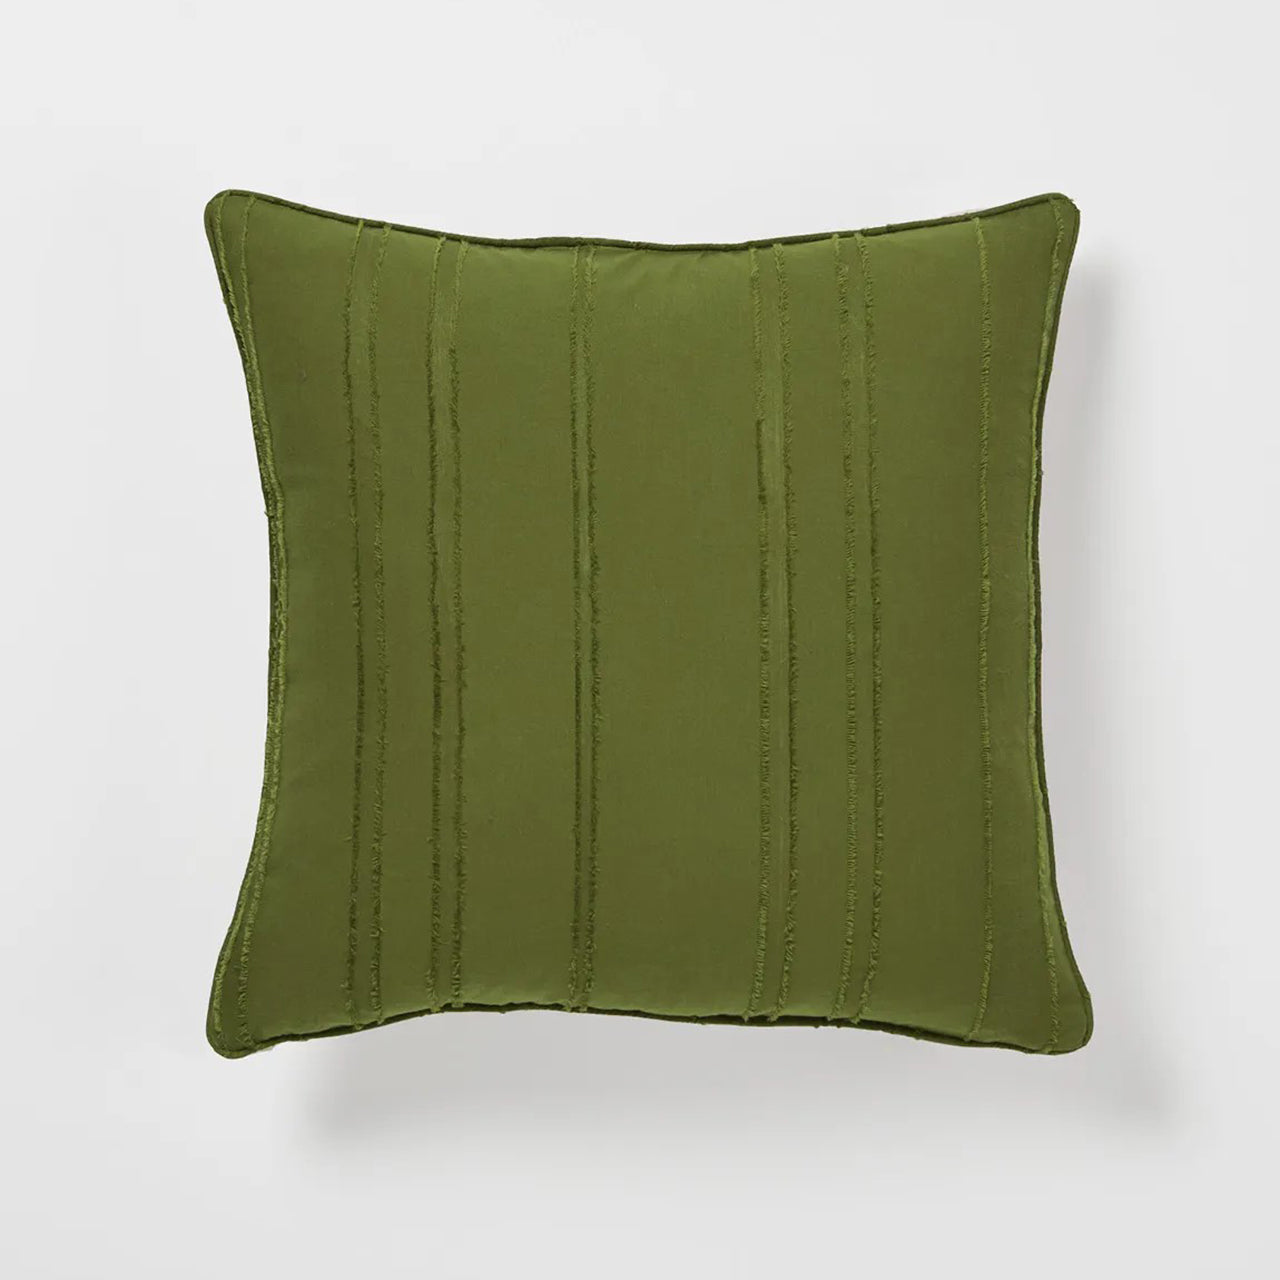 Bedford Cushion Cover on a white background